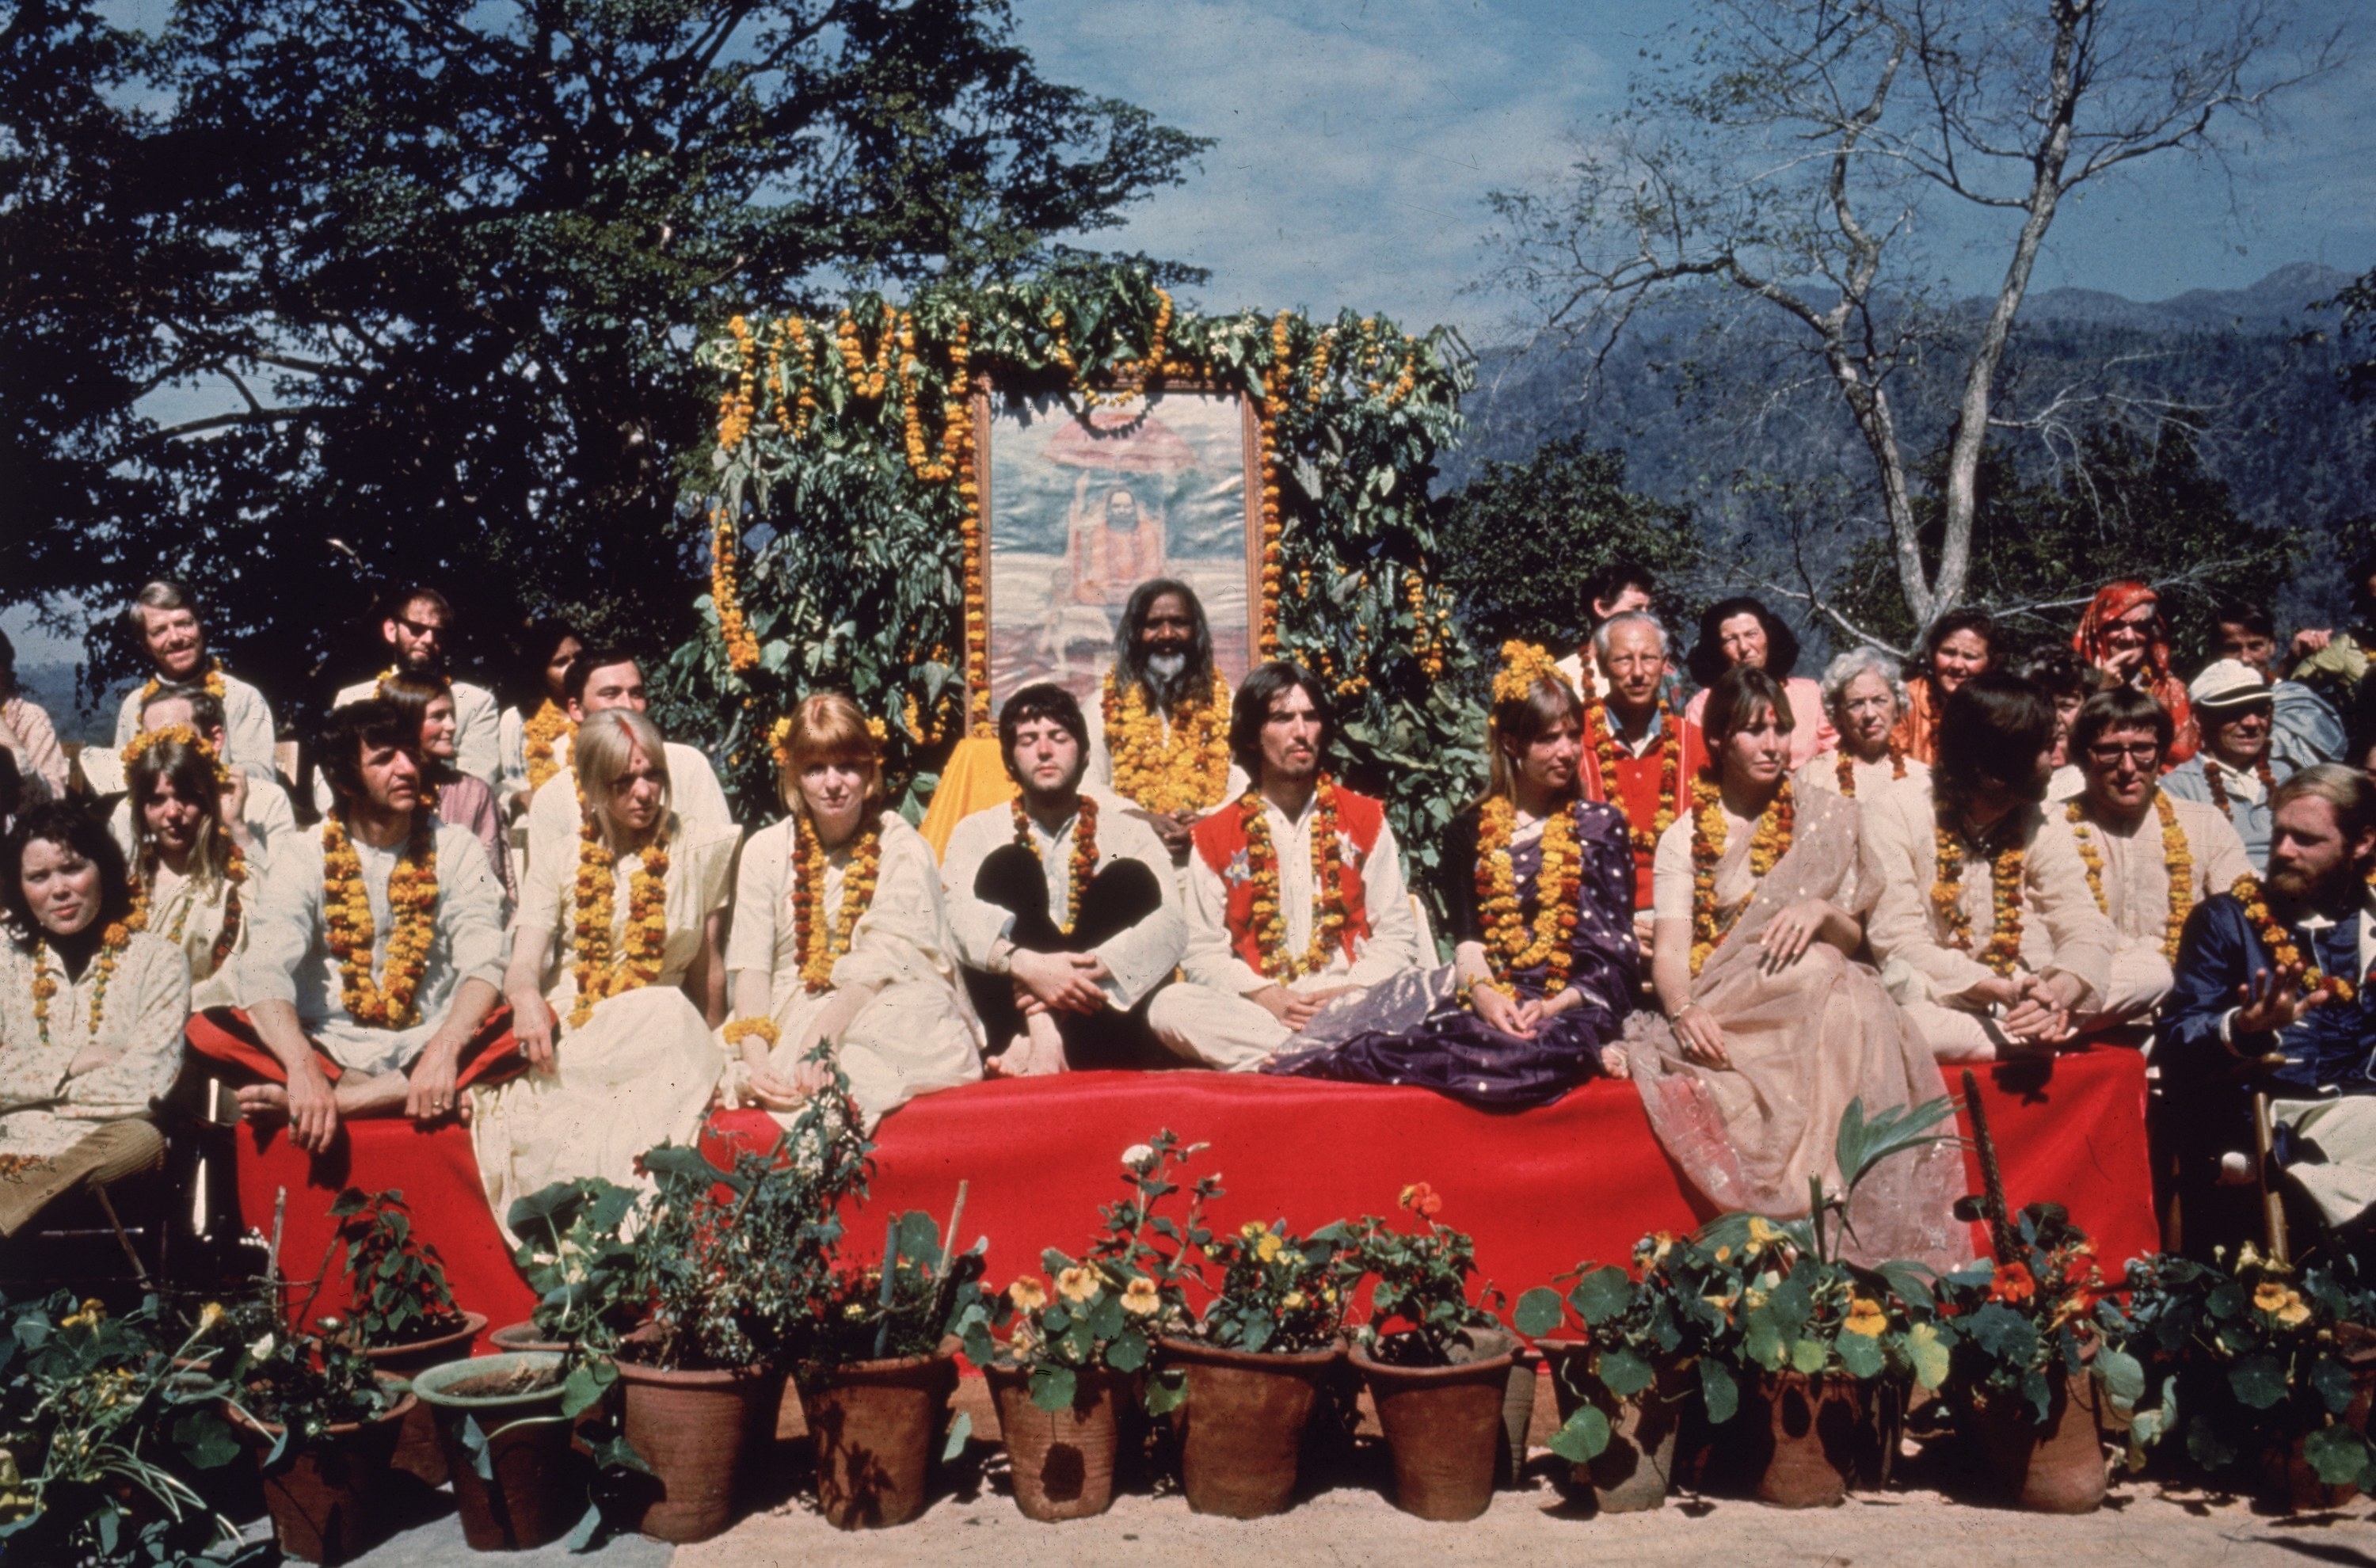 The band is welcomed to India